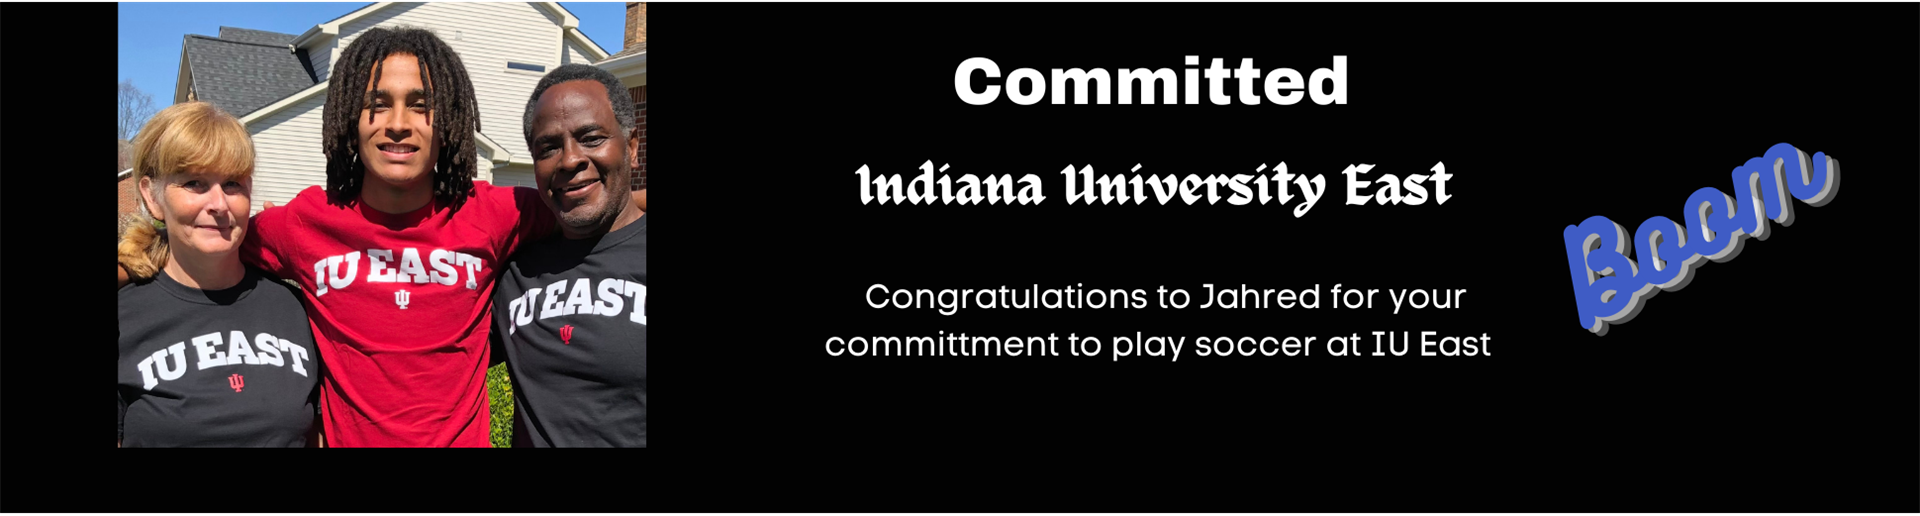 Congratulations on your commitment